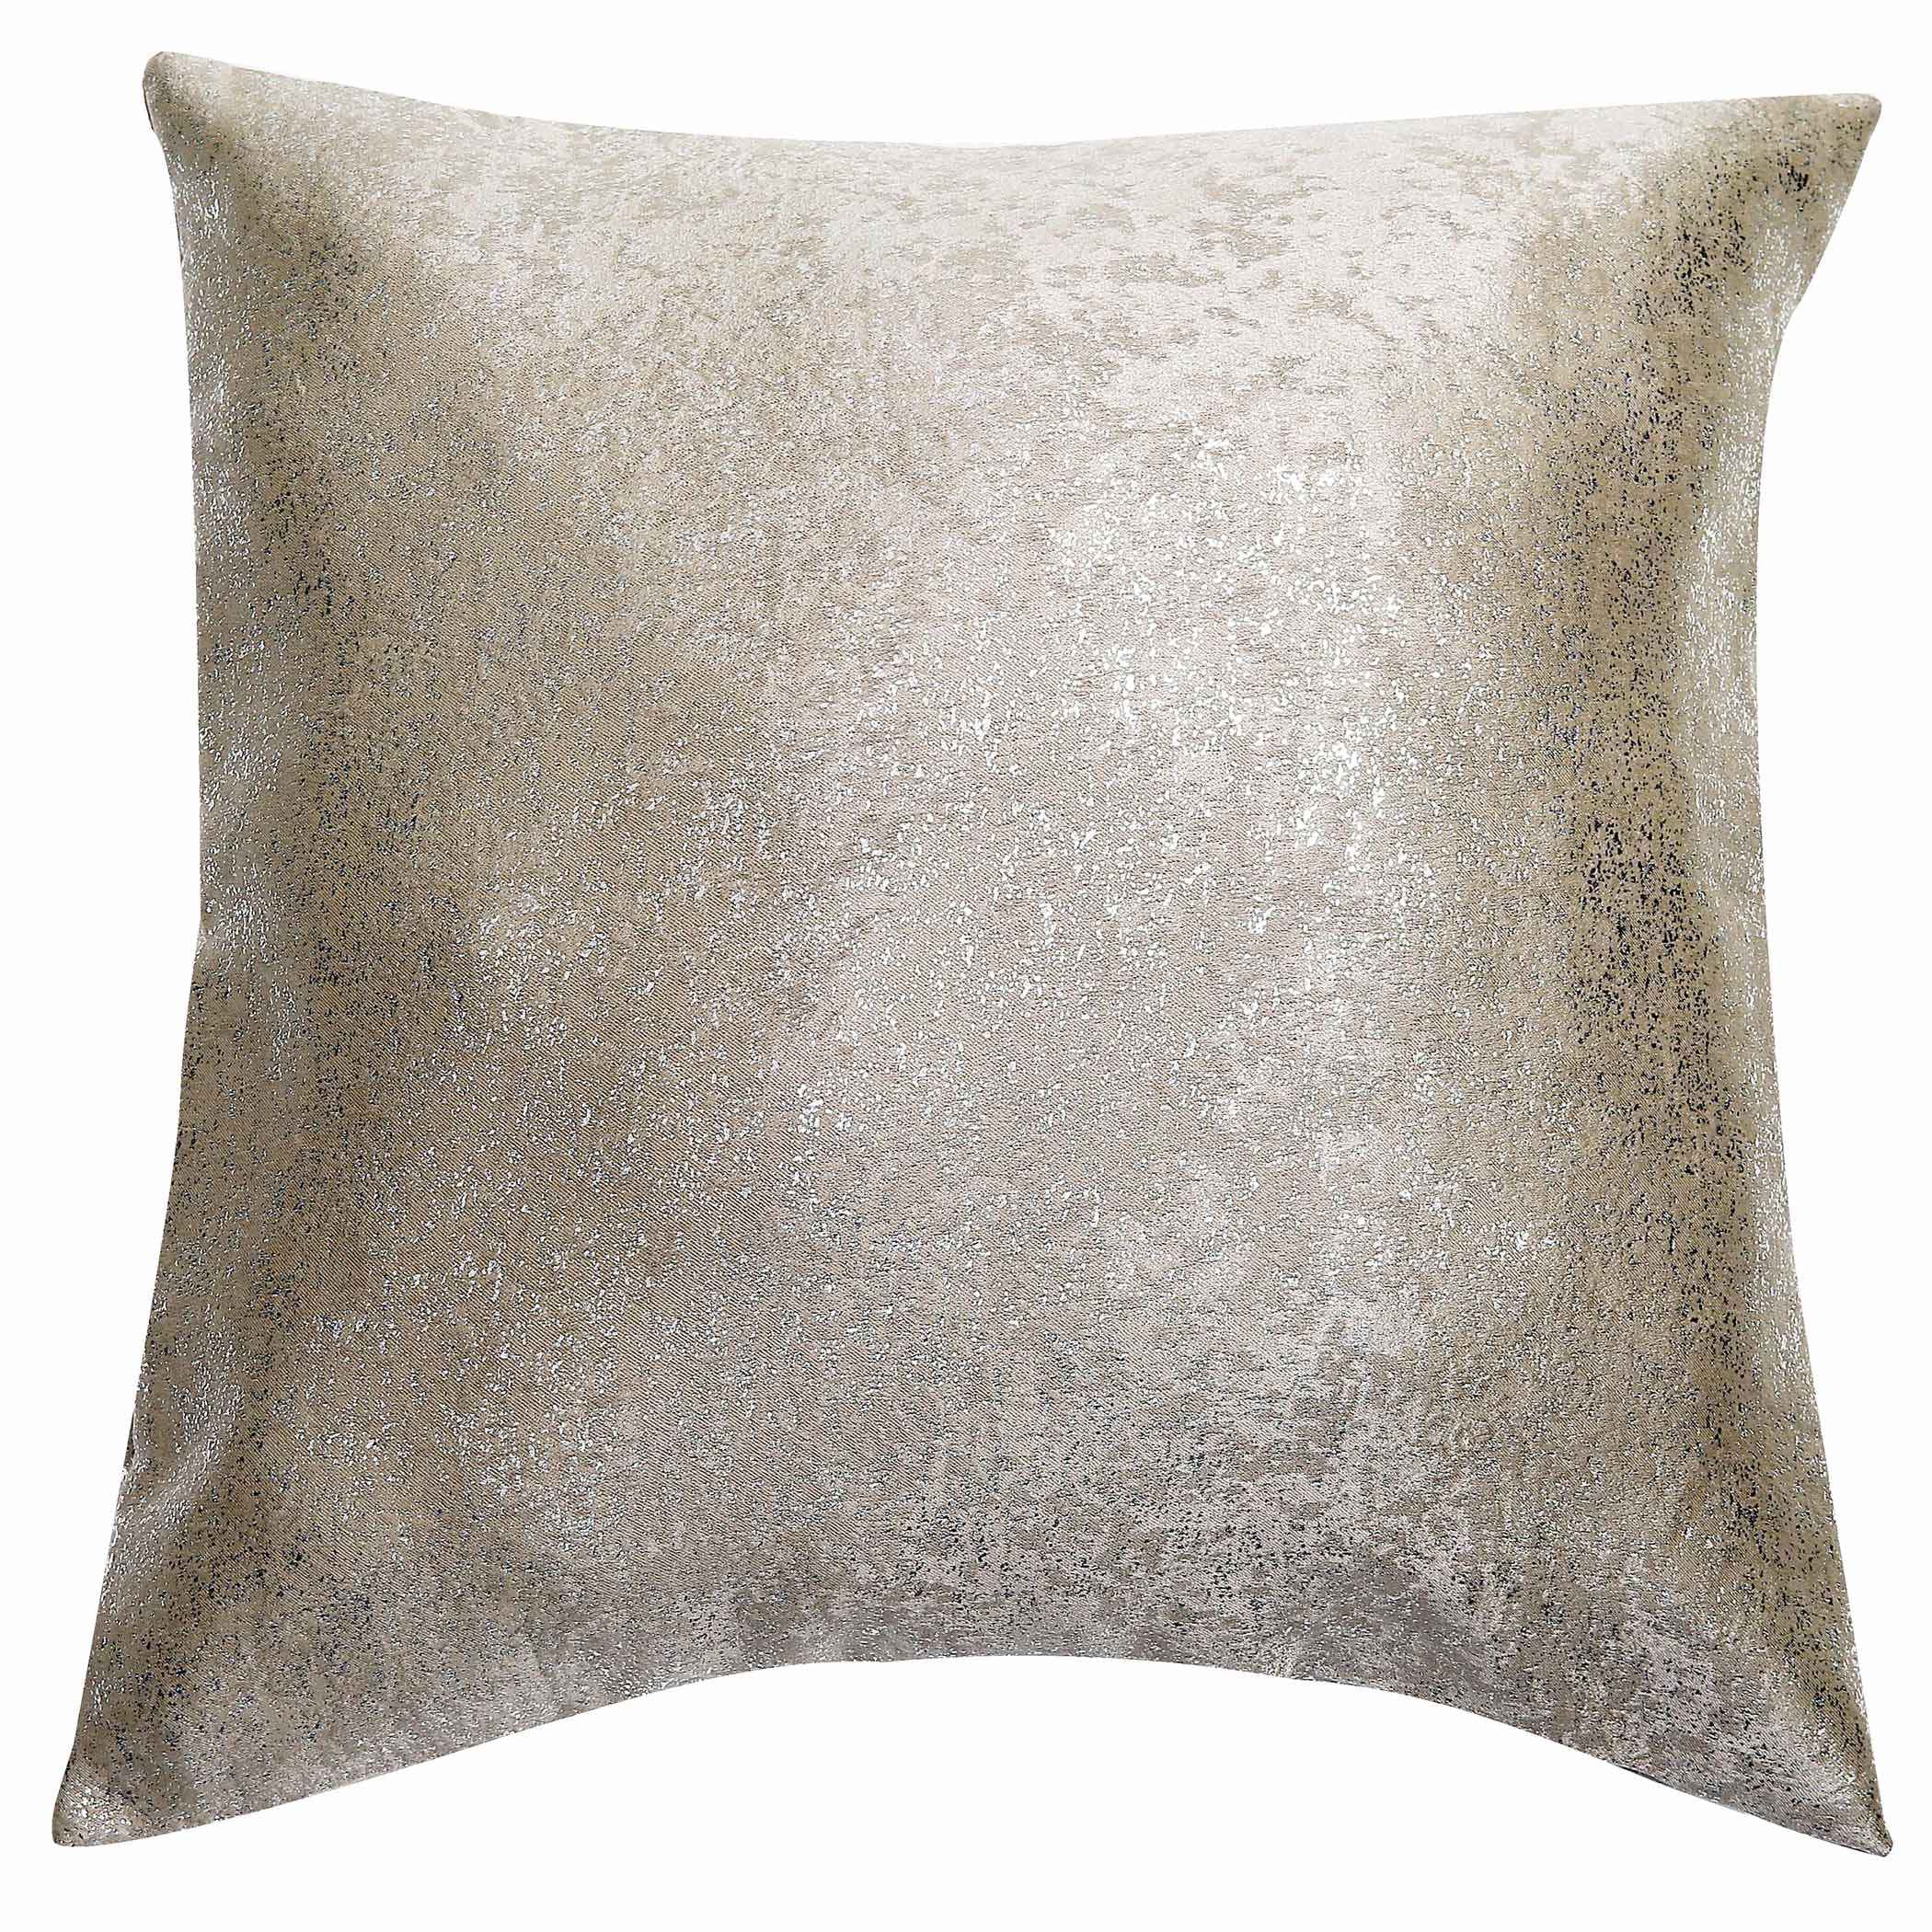 Euro/Square Size Pillow Sham with Metallic Accent 26in x 26in 1 Taupe Single 